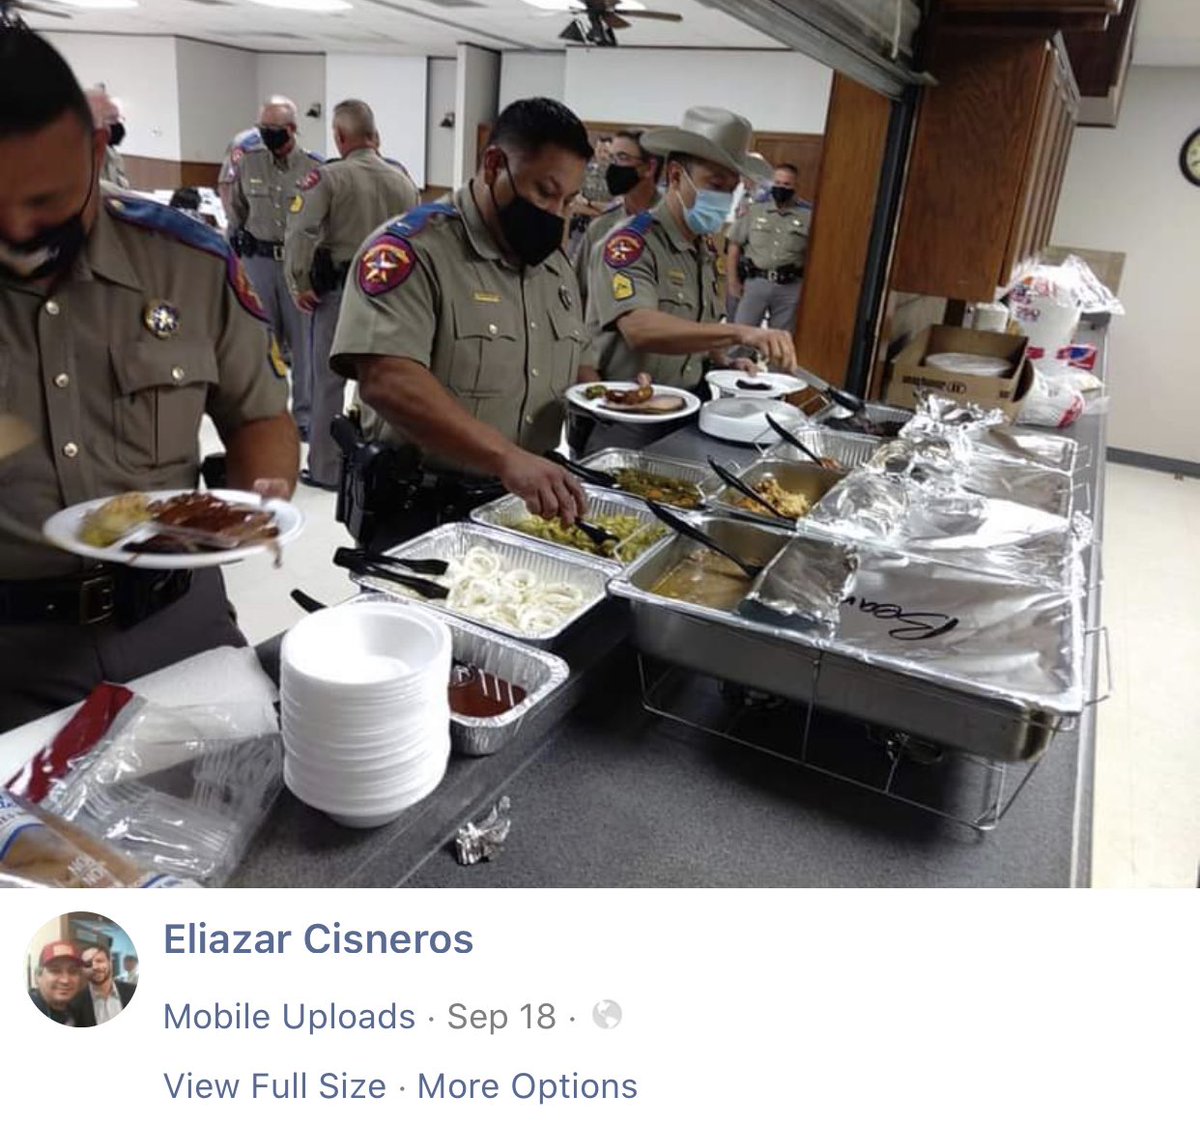 Many are asking where were the cops? Where was the Texas highway patrol during the Biden/Harris bus intimidation attack?Turns out, the Texas Department of Public Safety also has catering donated by Trump supporter Eliazar Cisneros, the man who rammed the white car in the video.